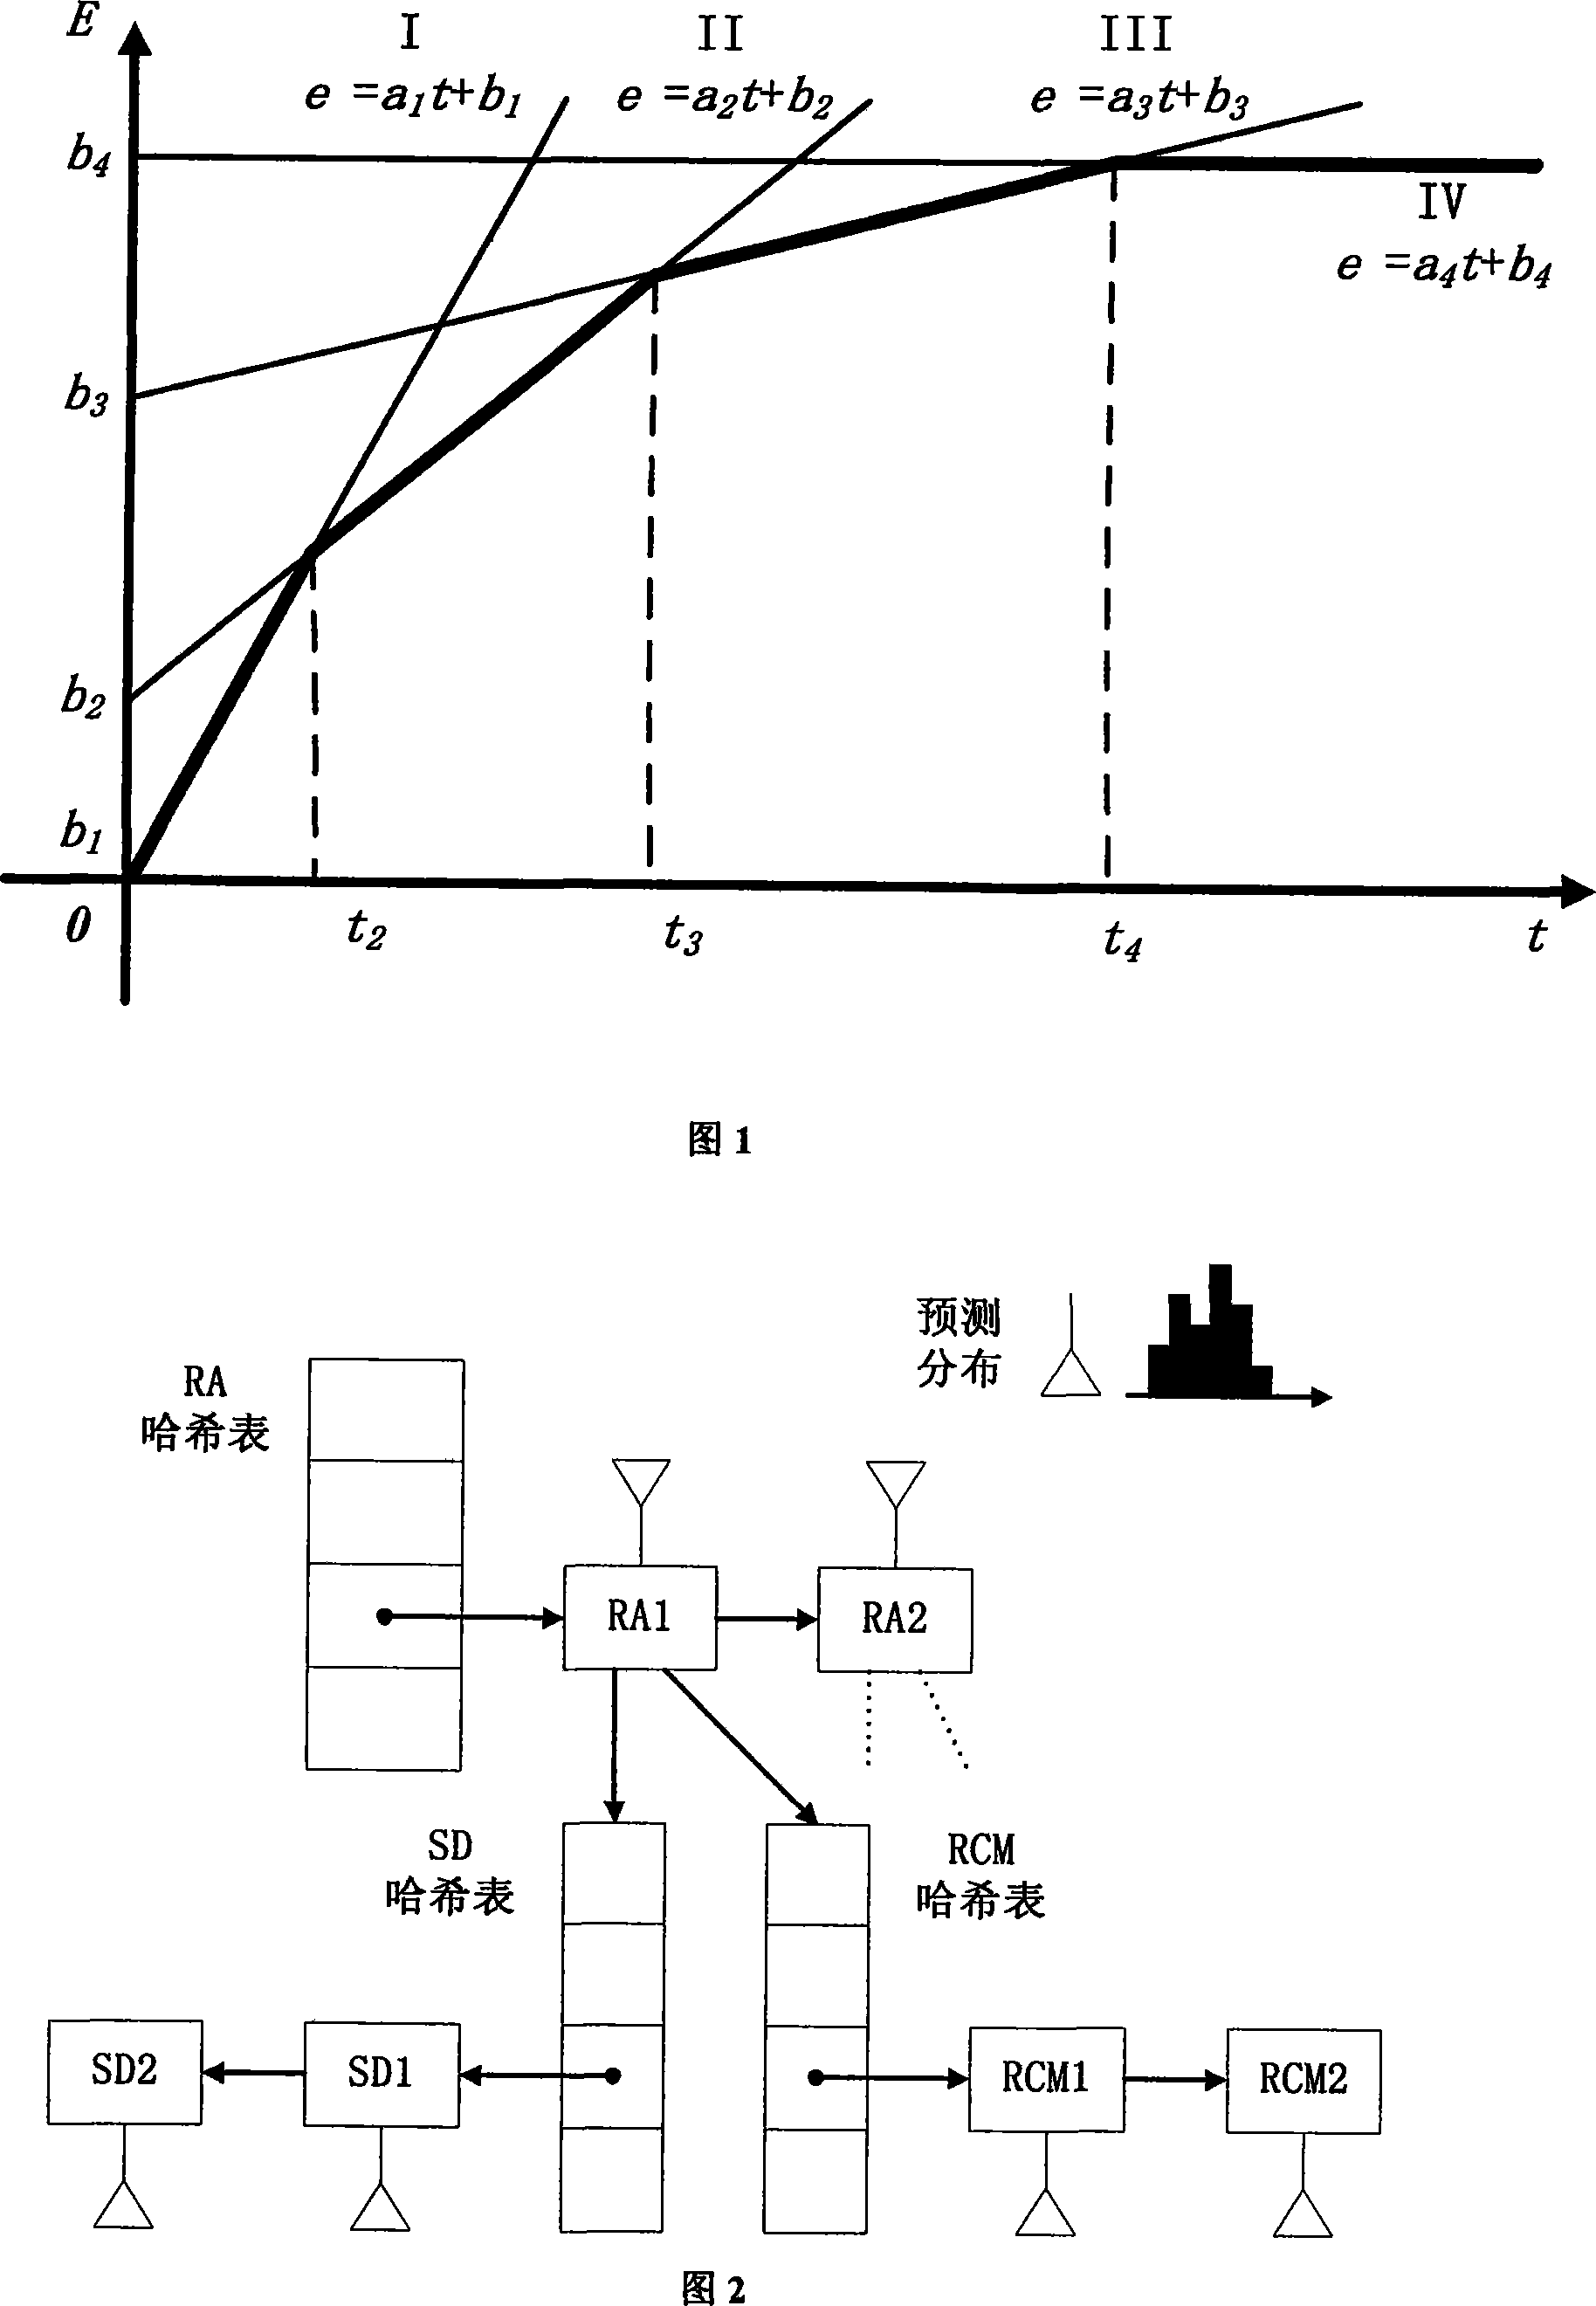 Dynamic power consumption control method for multithread predication by stack depth